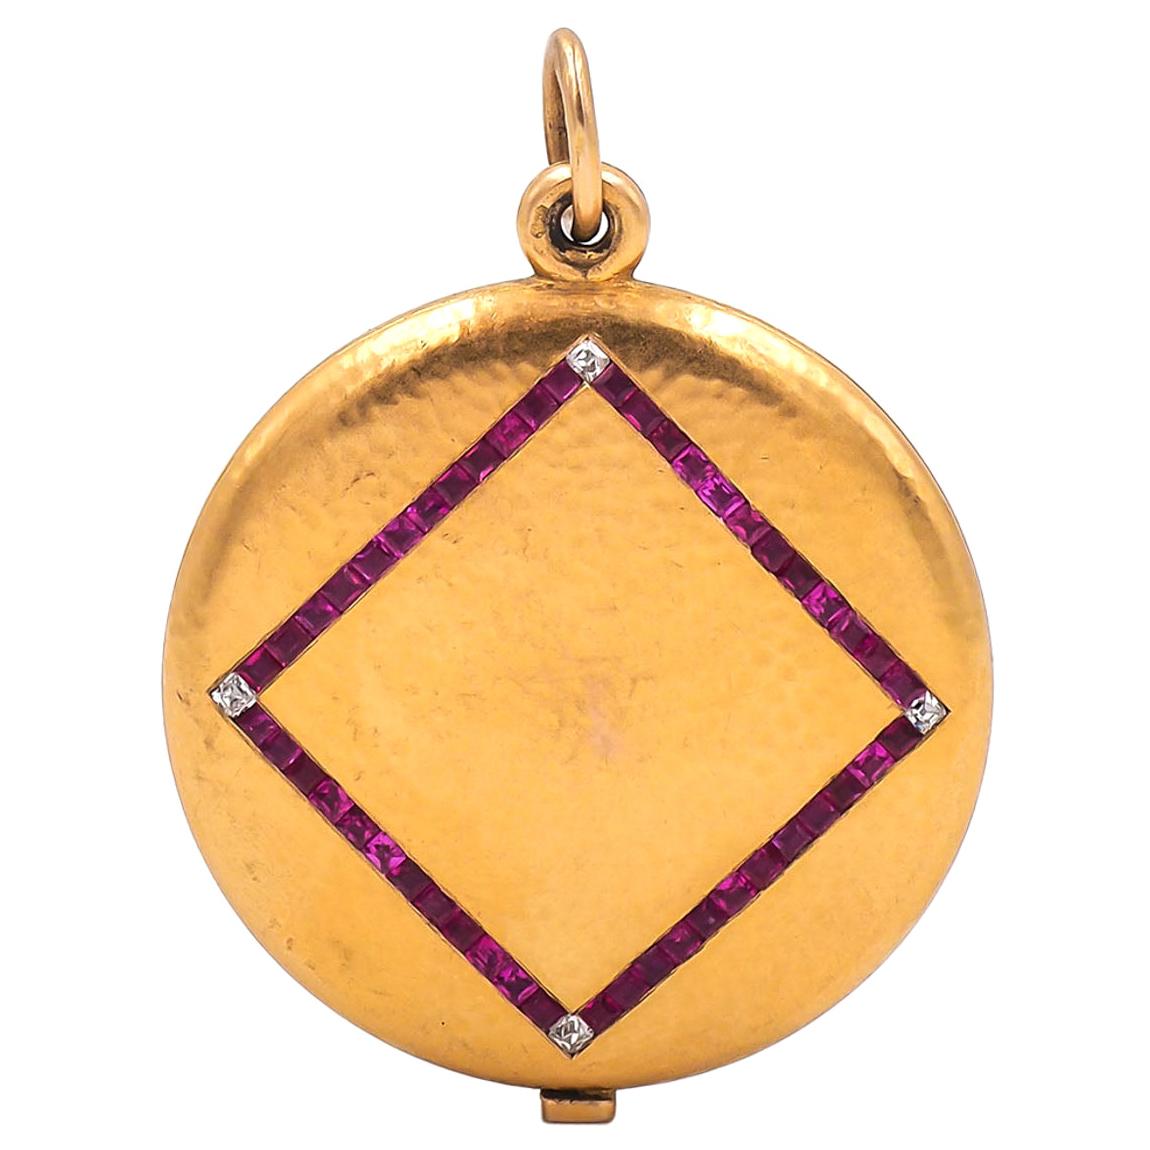 Victorian era Ruby & Diamond Slider Locket composed of 14k yellow gold. With 48 square calibré cut rubies (non heat treated) weighing approximately 1.44 carats in total, and 4 Old Mine cut diamonds weighing approximately 0.16 carats in total. With a